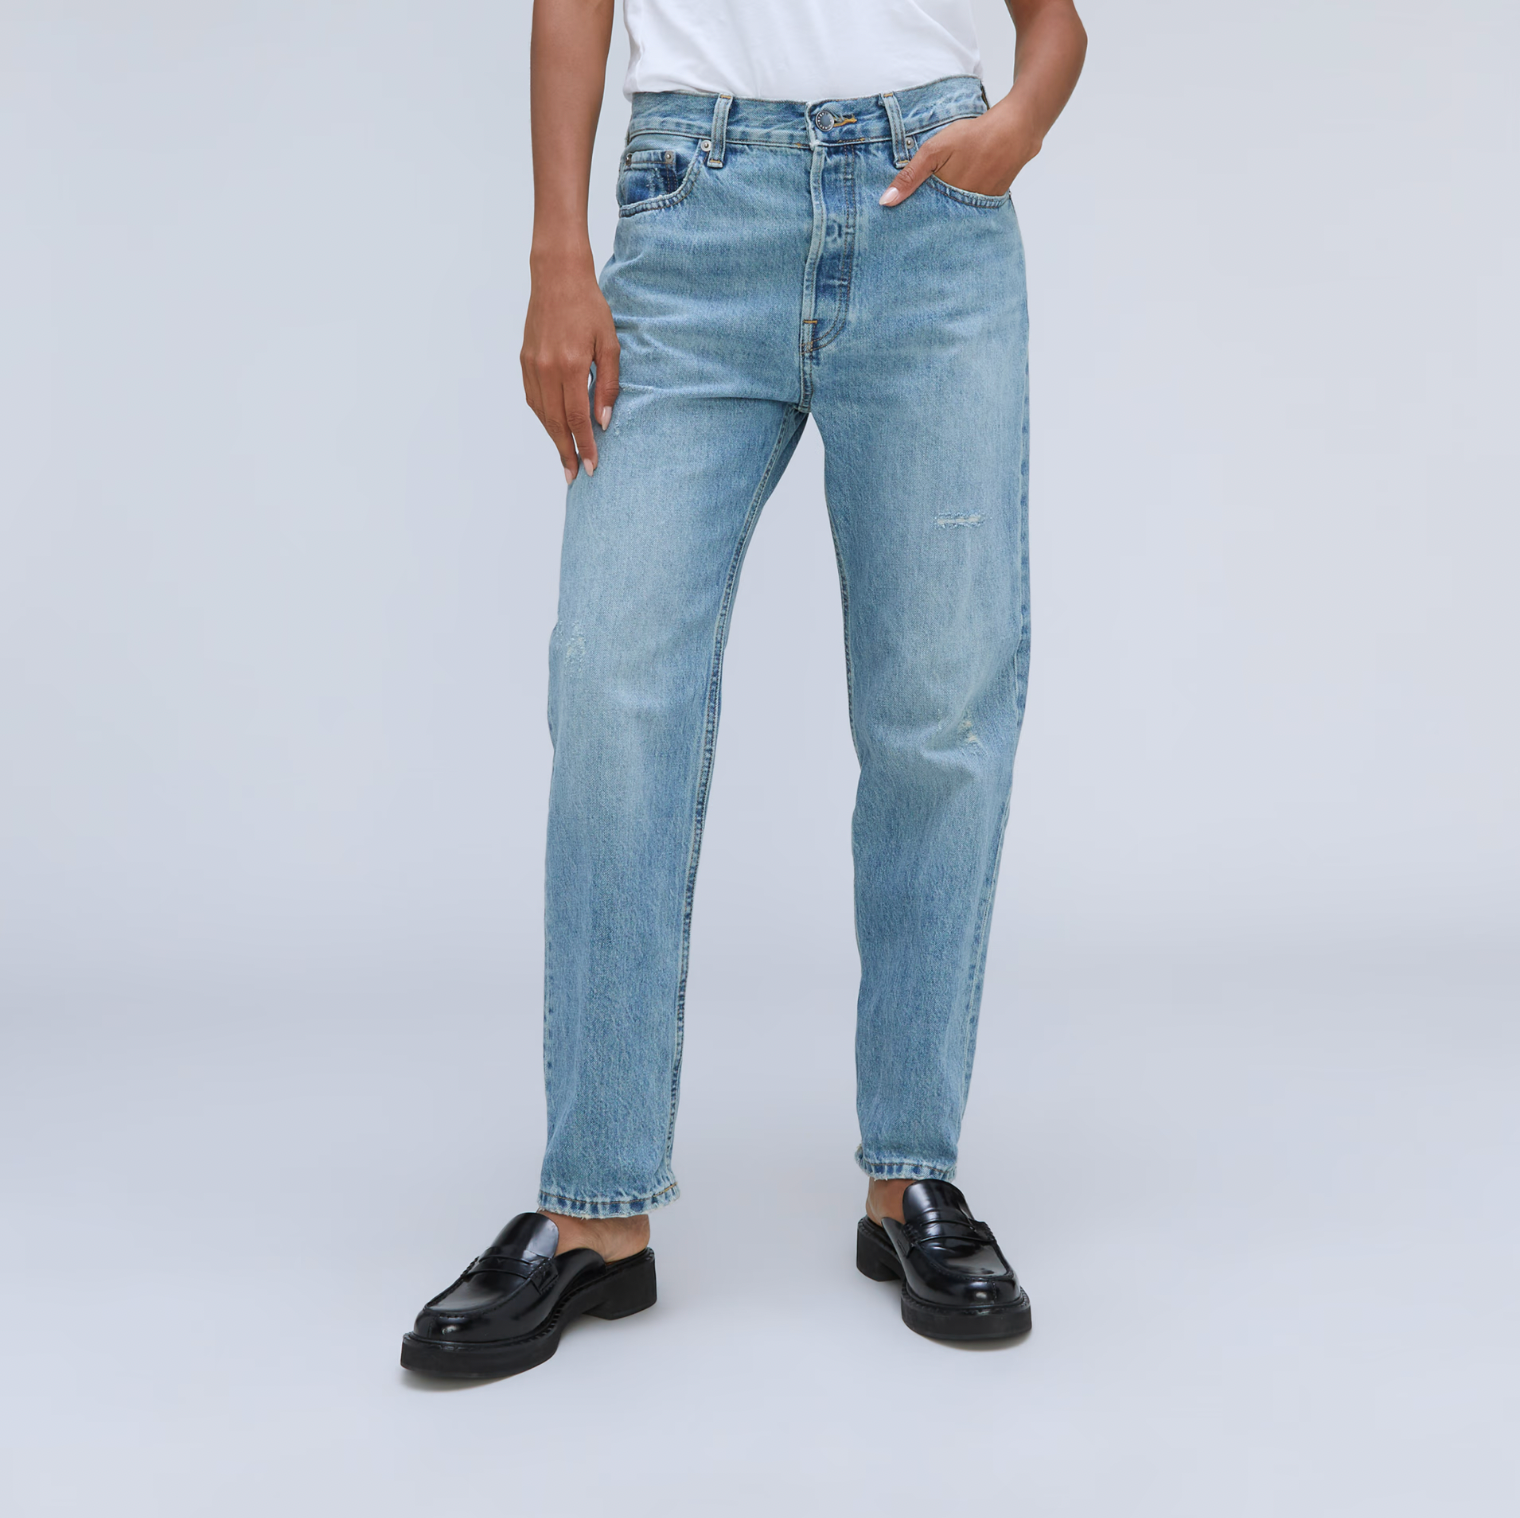 Everlane + The Rigid Slouch Jean